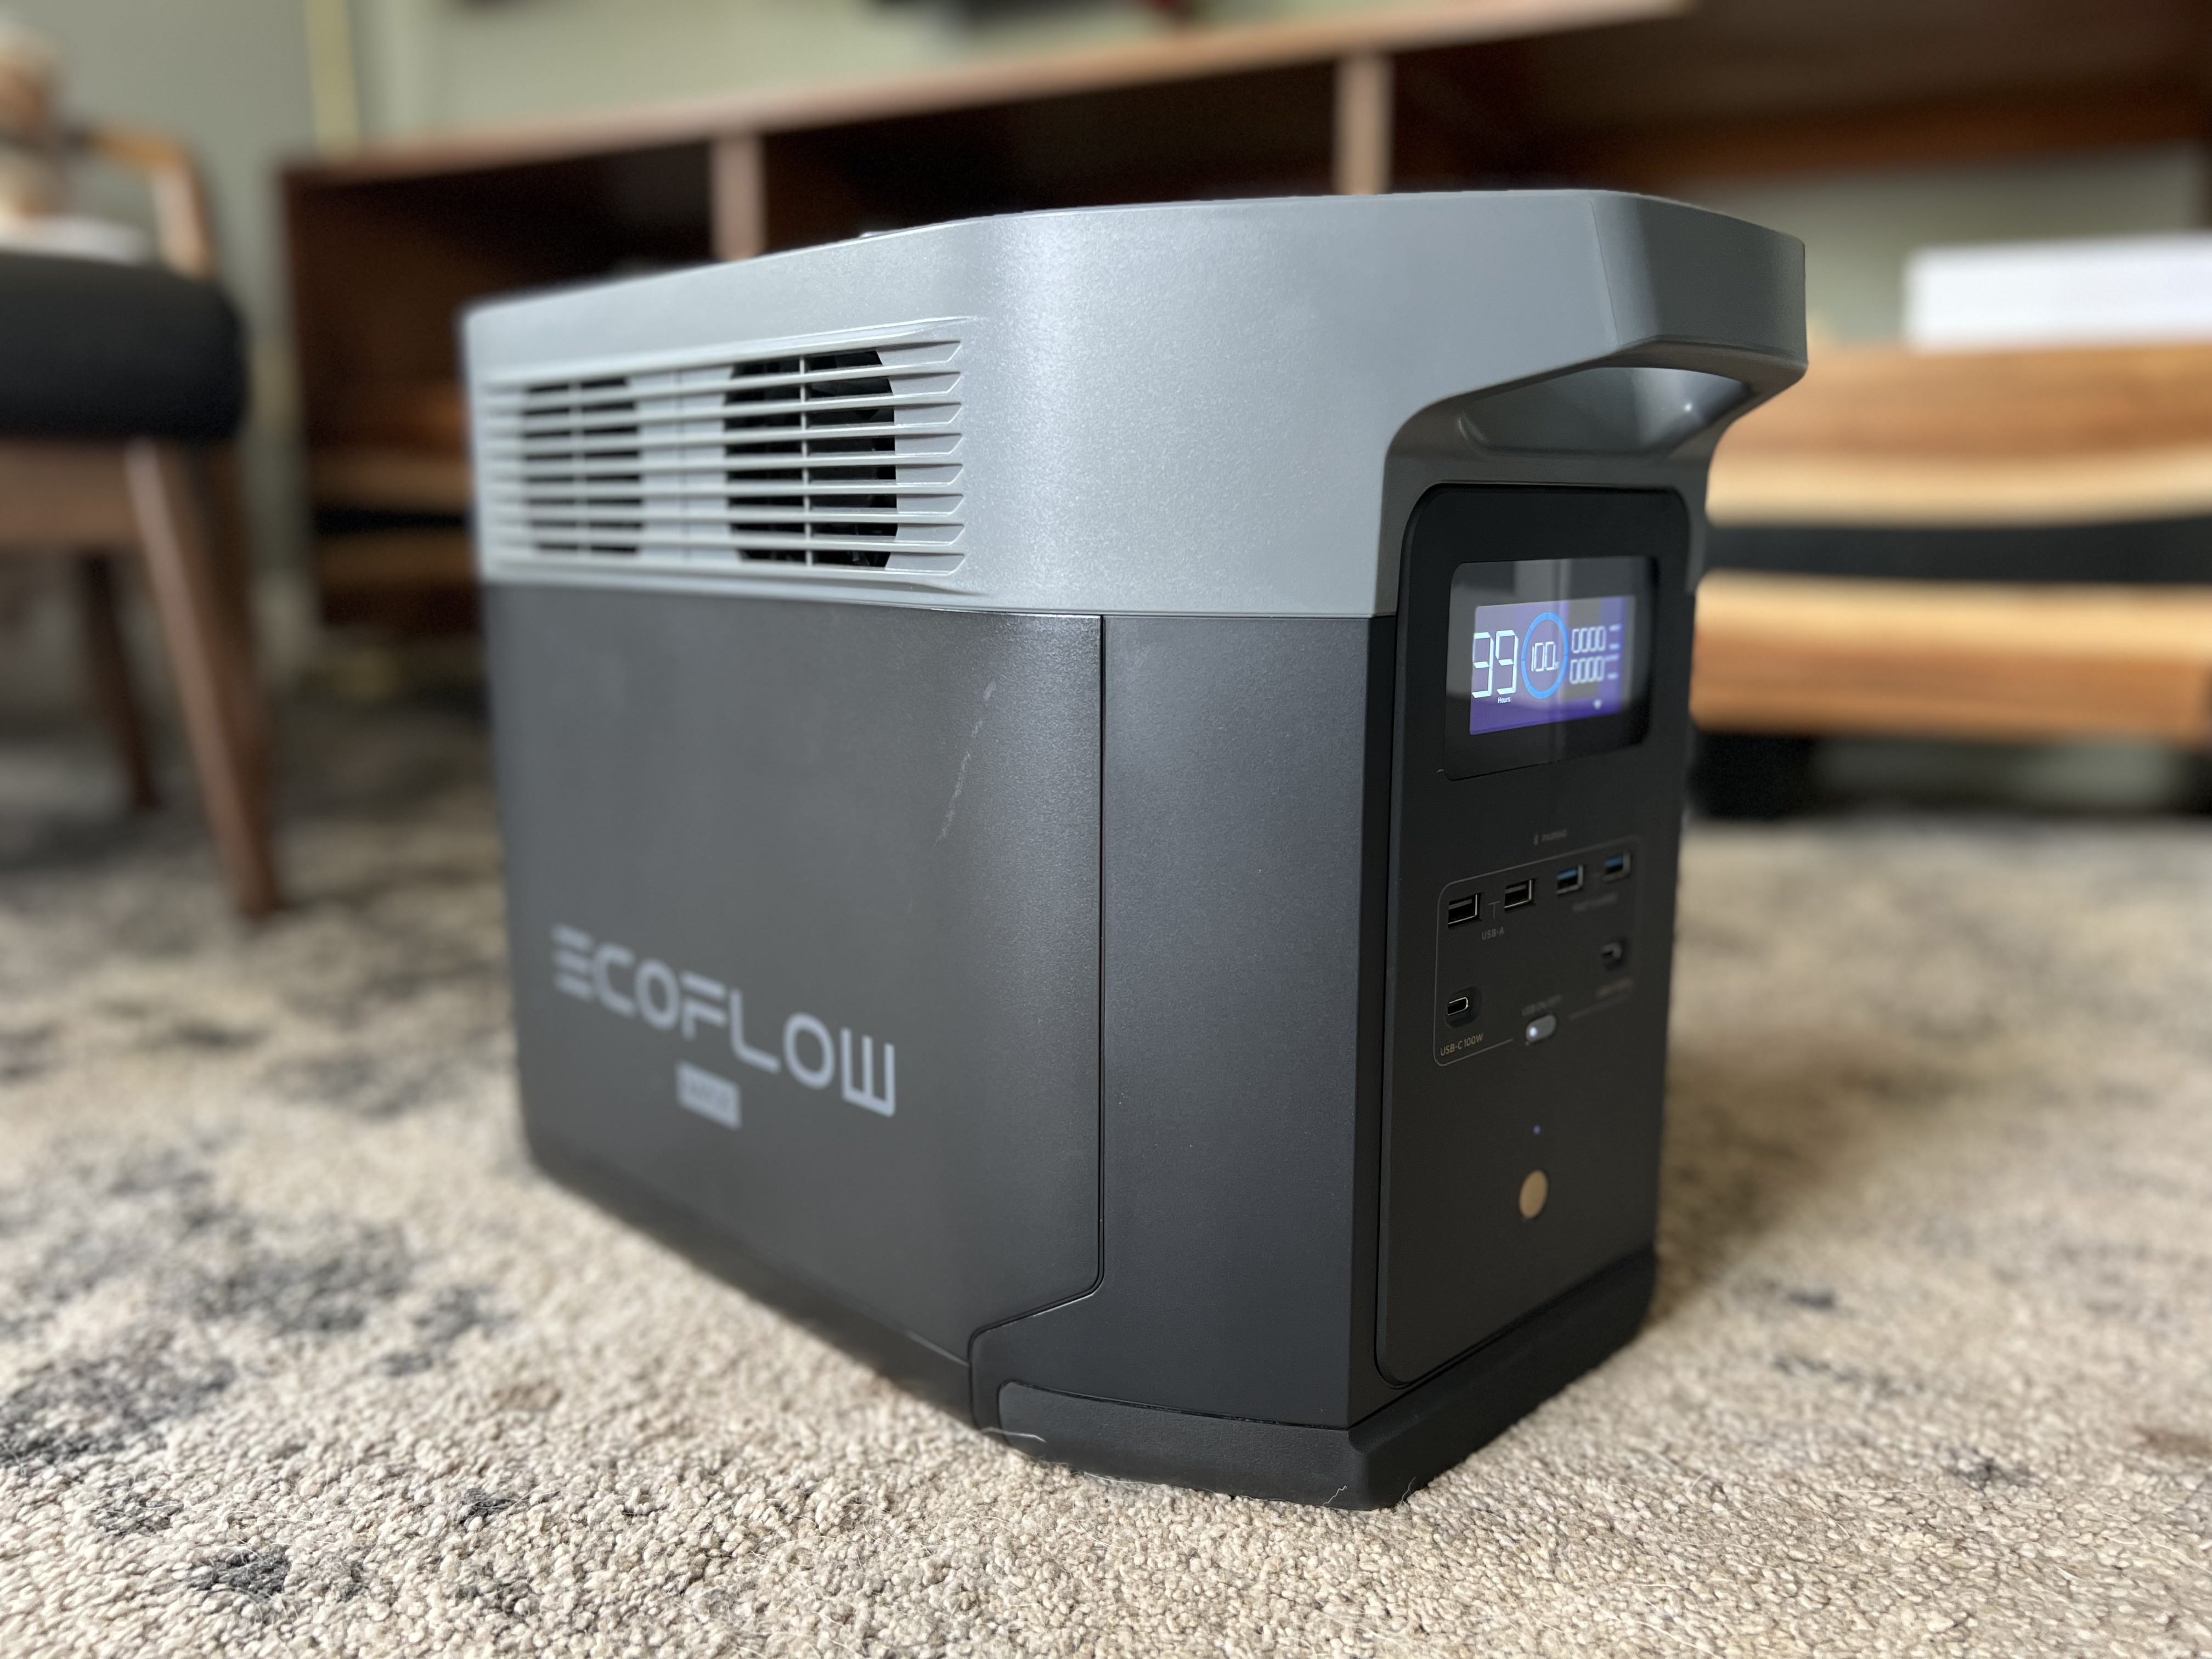 EcoFlow Delta 2 power station review: Power and ports aplenty